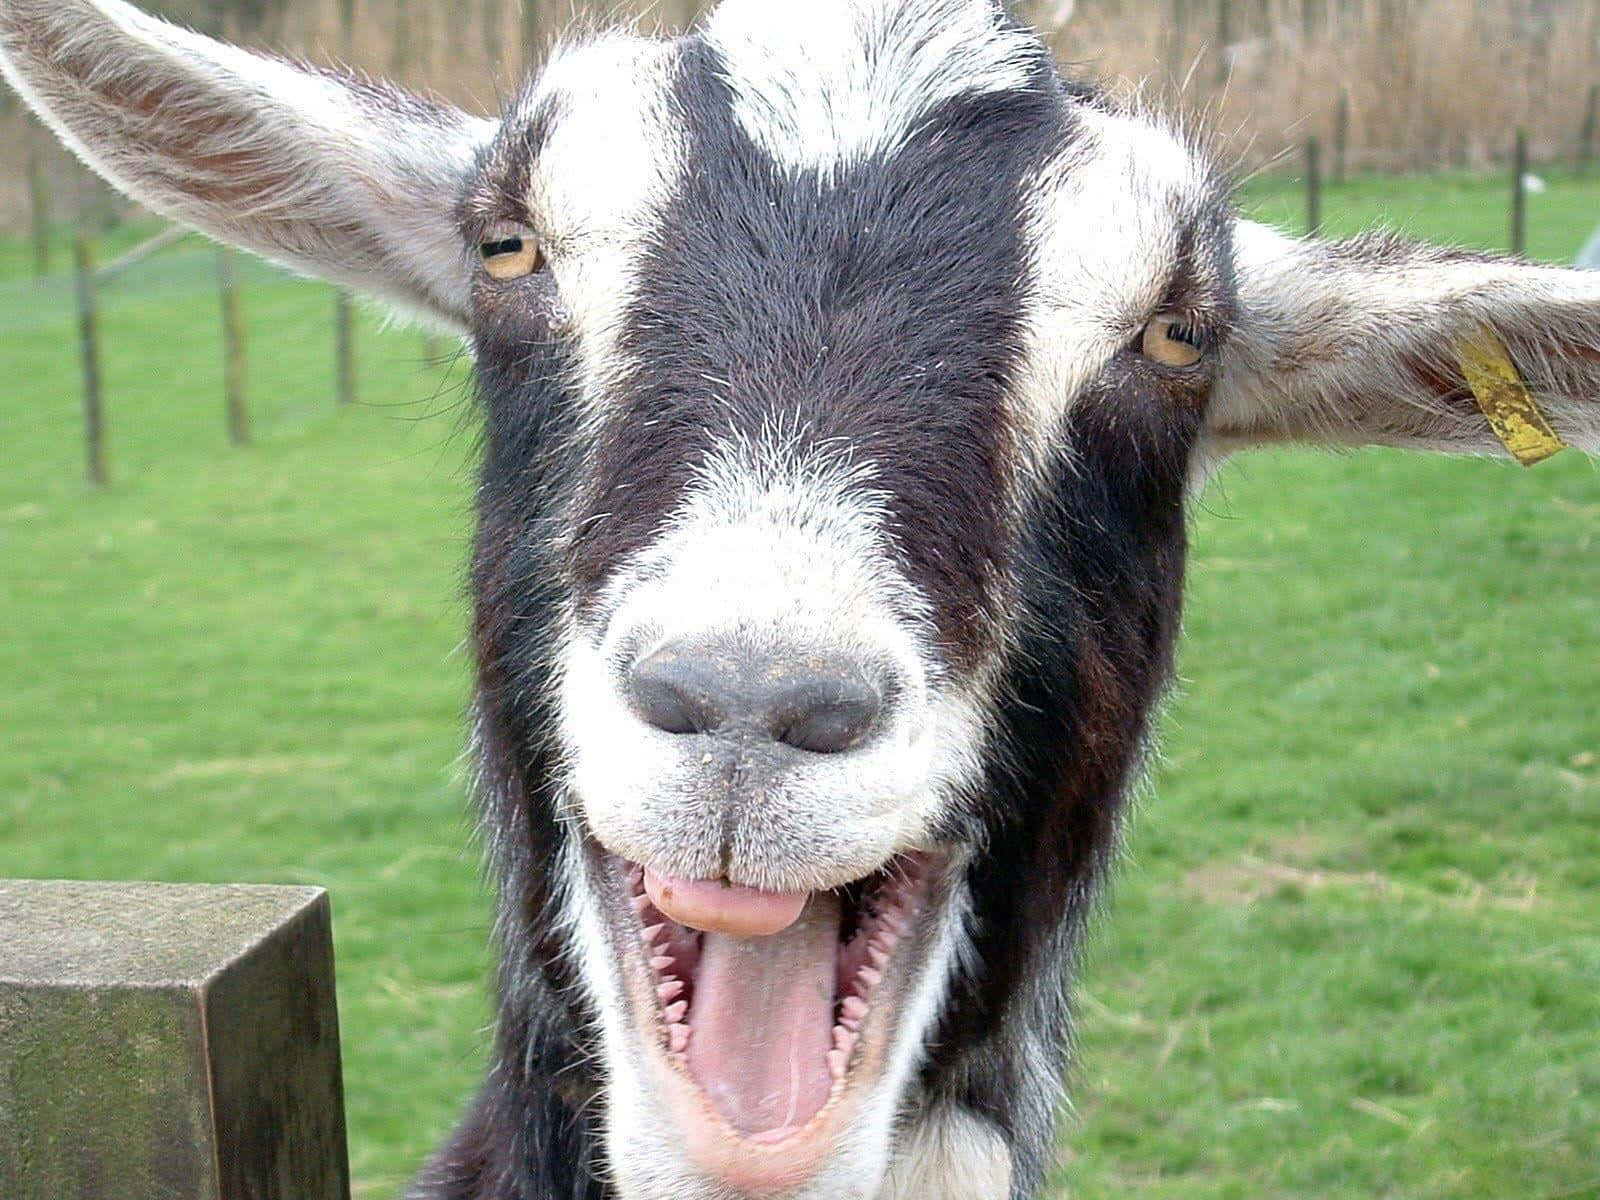 A Goat With Its Tongue Out